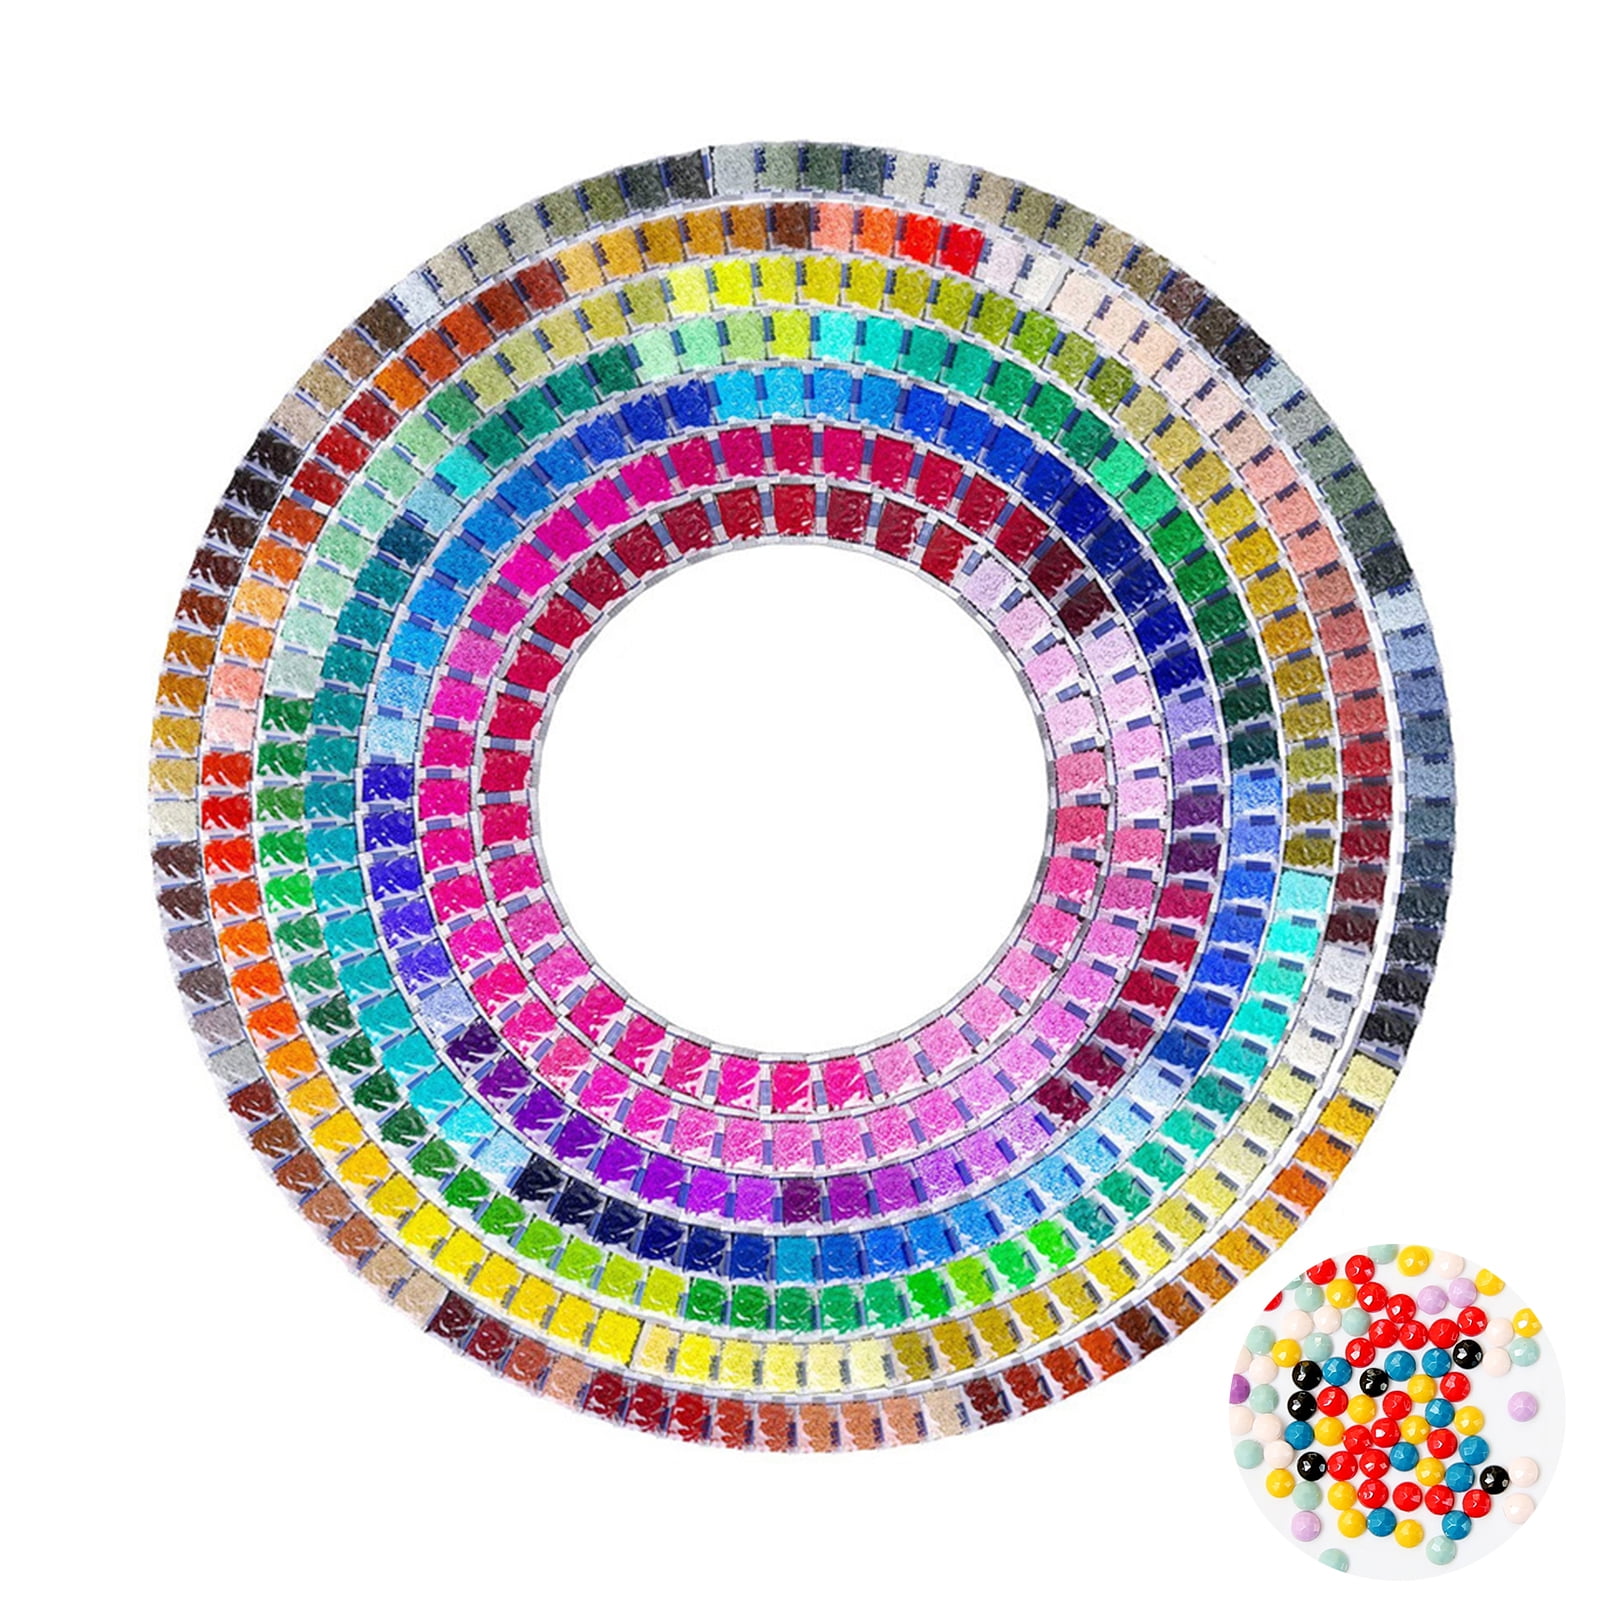 YBUTVY 5D Diamond Painting Beads - 447 Colors 447000 Pcs Round Diamond Accessories Replacement for Missing Drills for DIY Cra